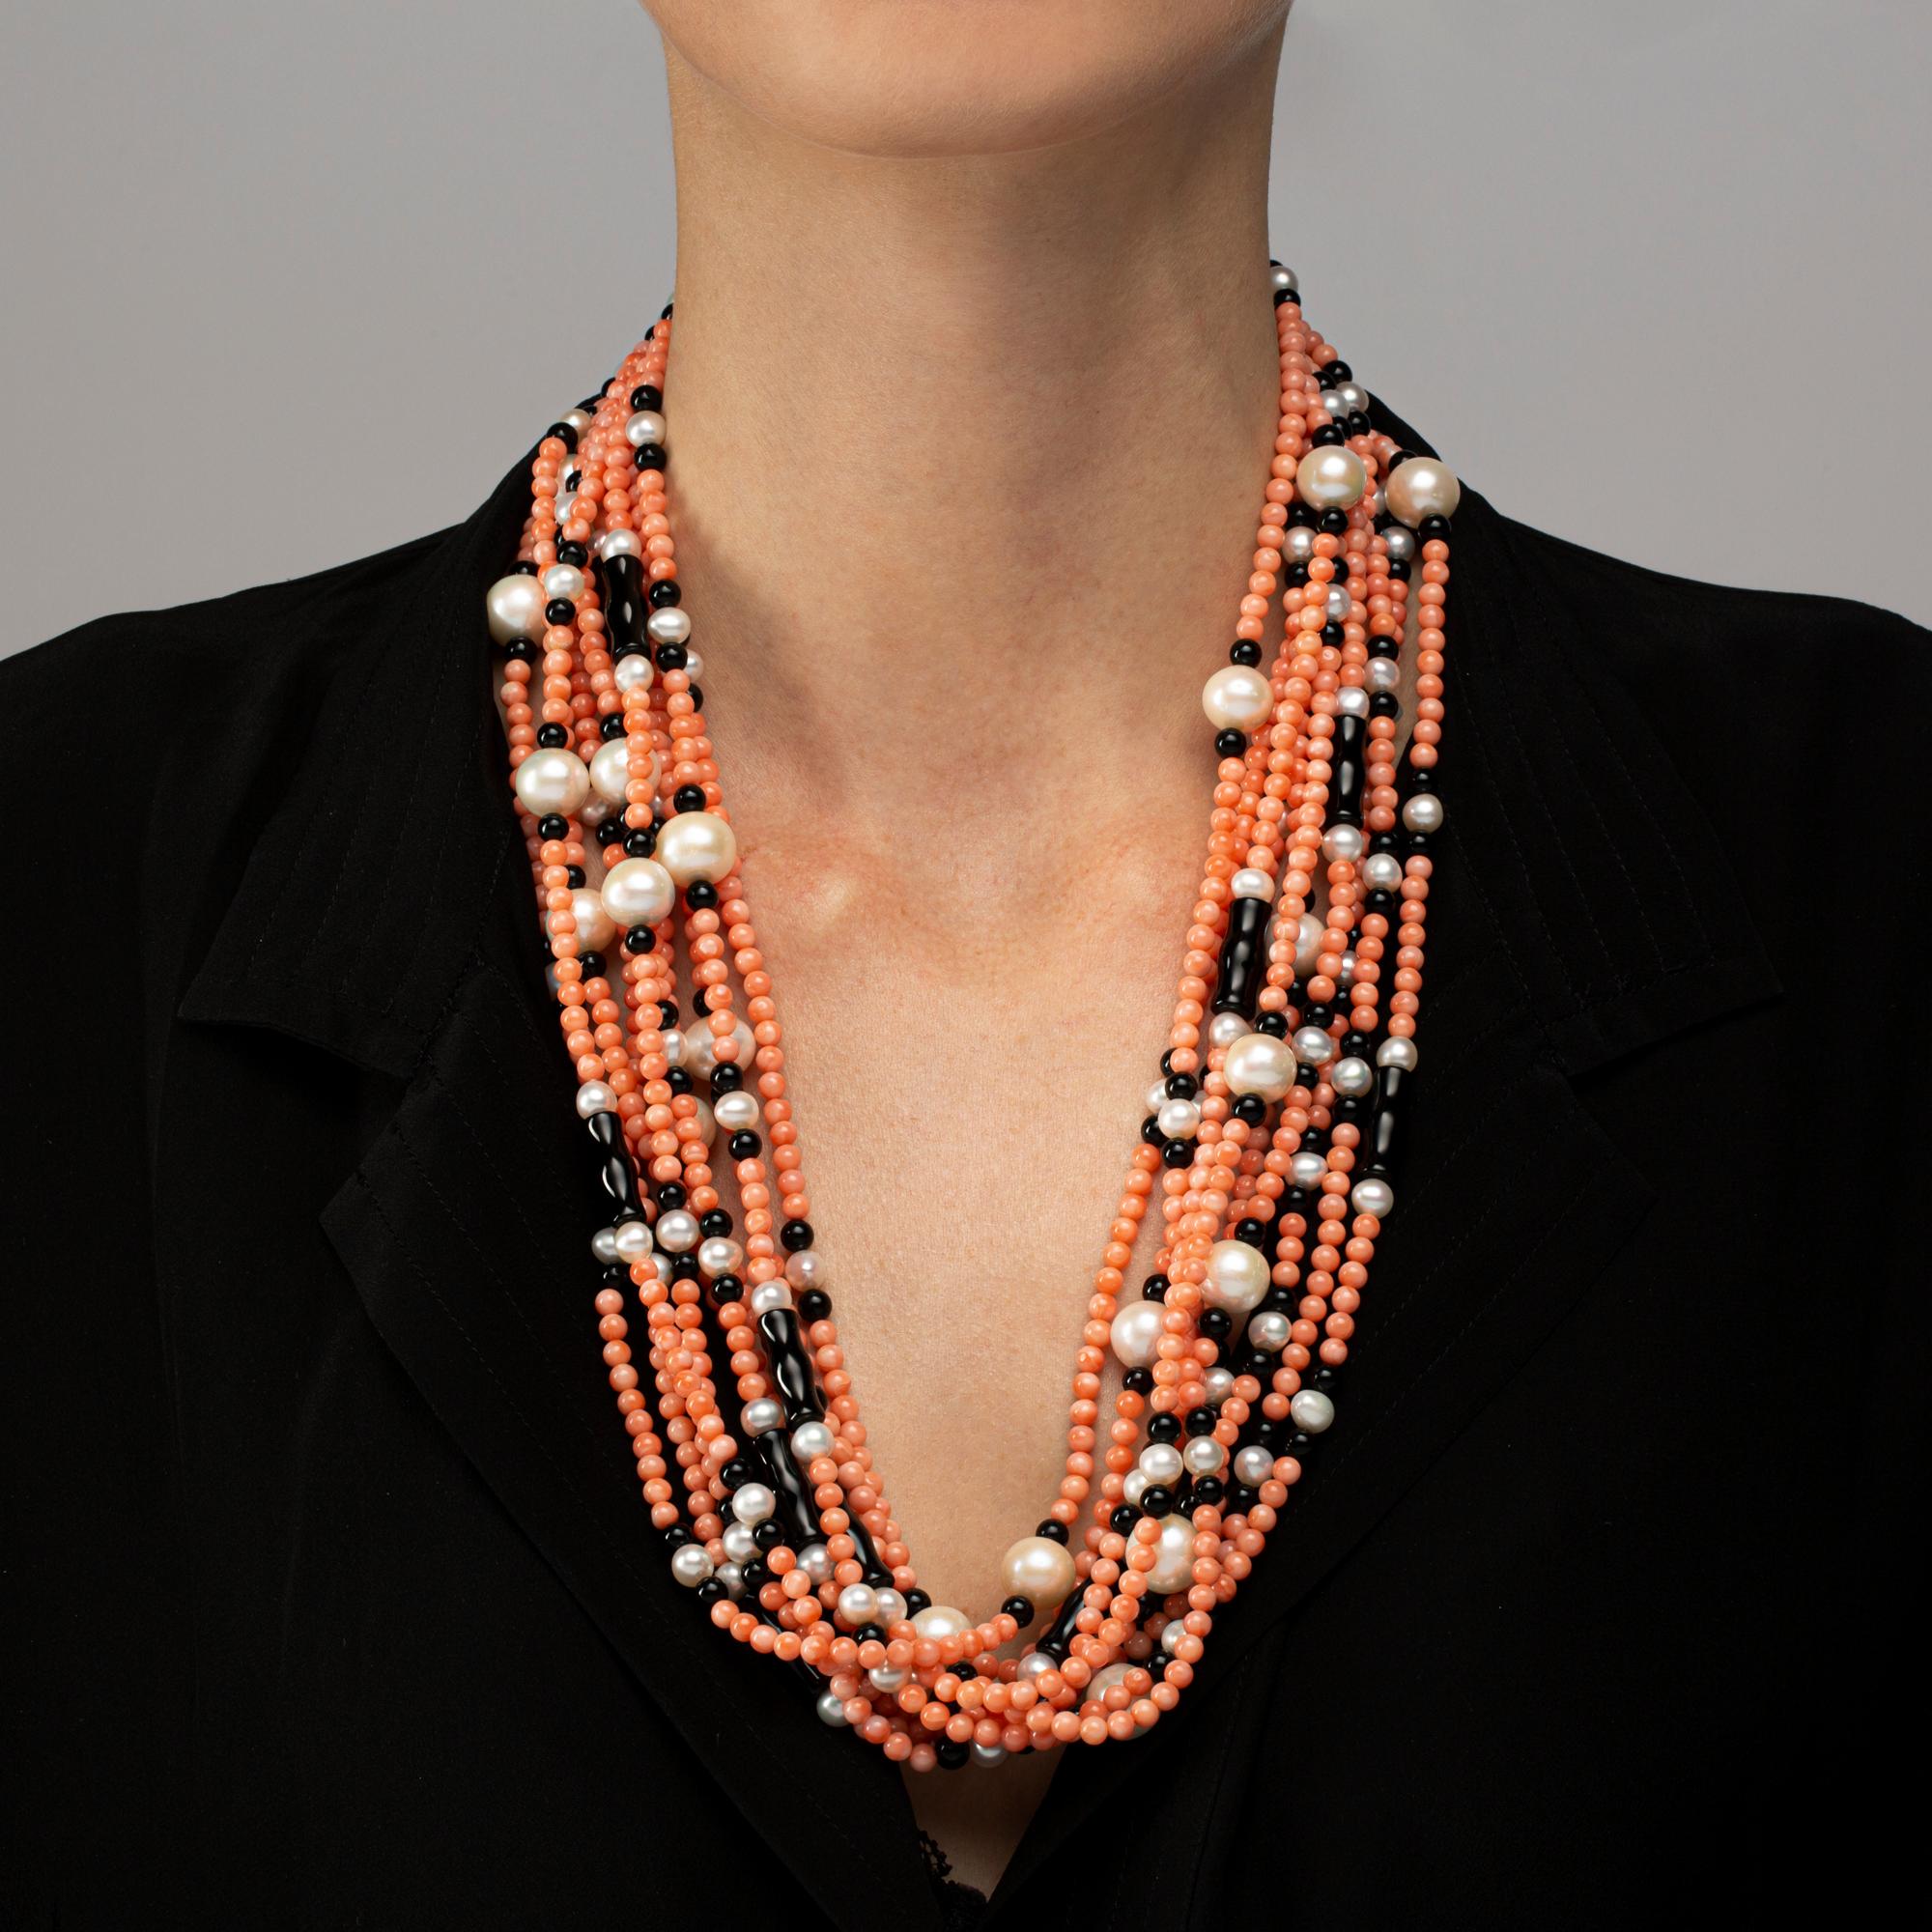 Alex Jona design collection, hand crafted in Italy, 10 row mediterranean coral, onyx, fresh and sea water pearl necklace, with a 18 Karat yellow gold clasp.
Dimensions: L x 68 cm, L x 26.77 in.

Alex Jona jewels stand out, not only for their special